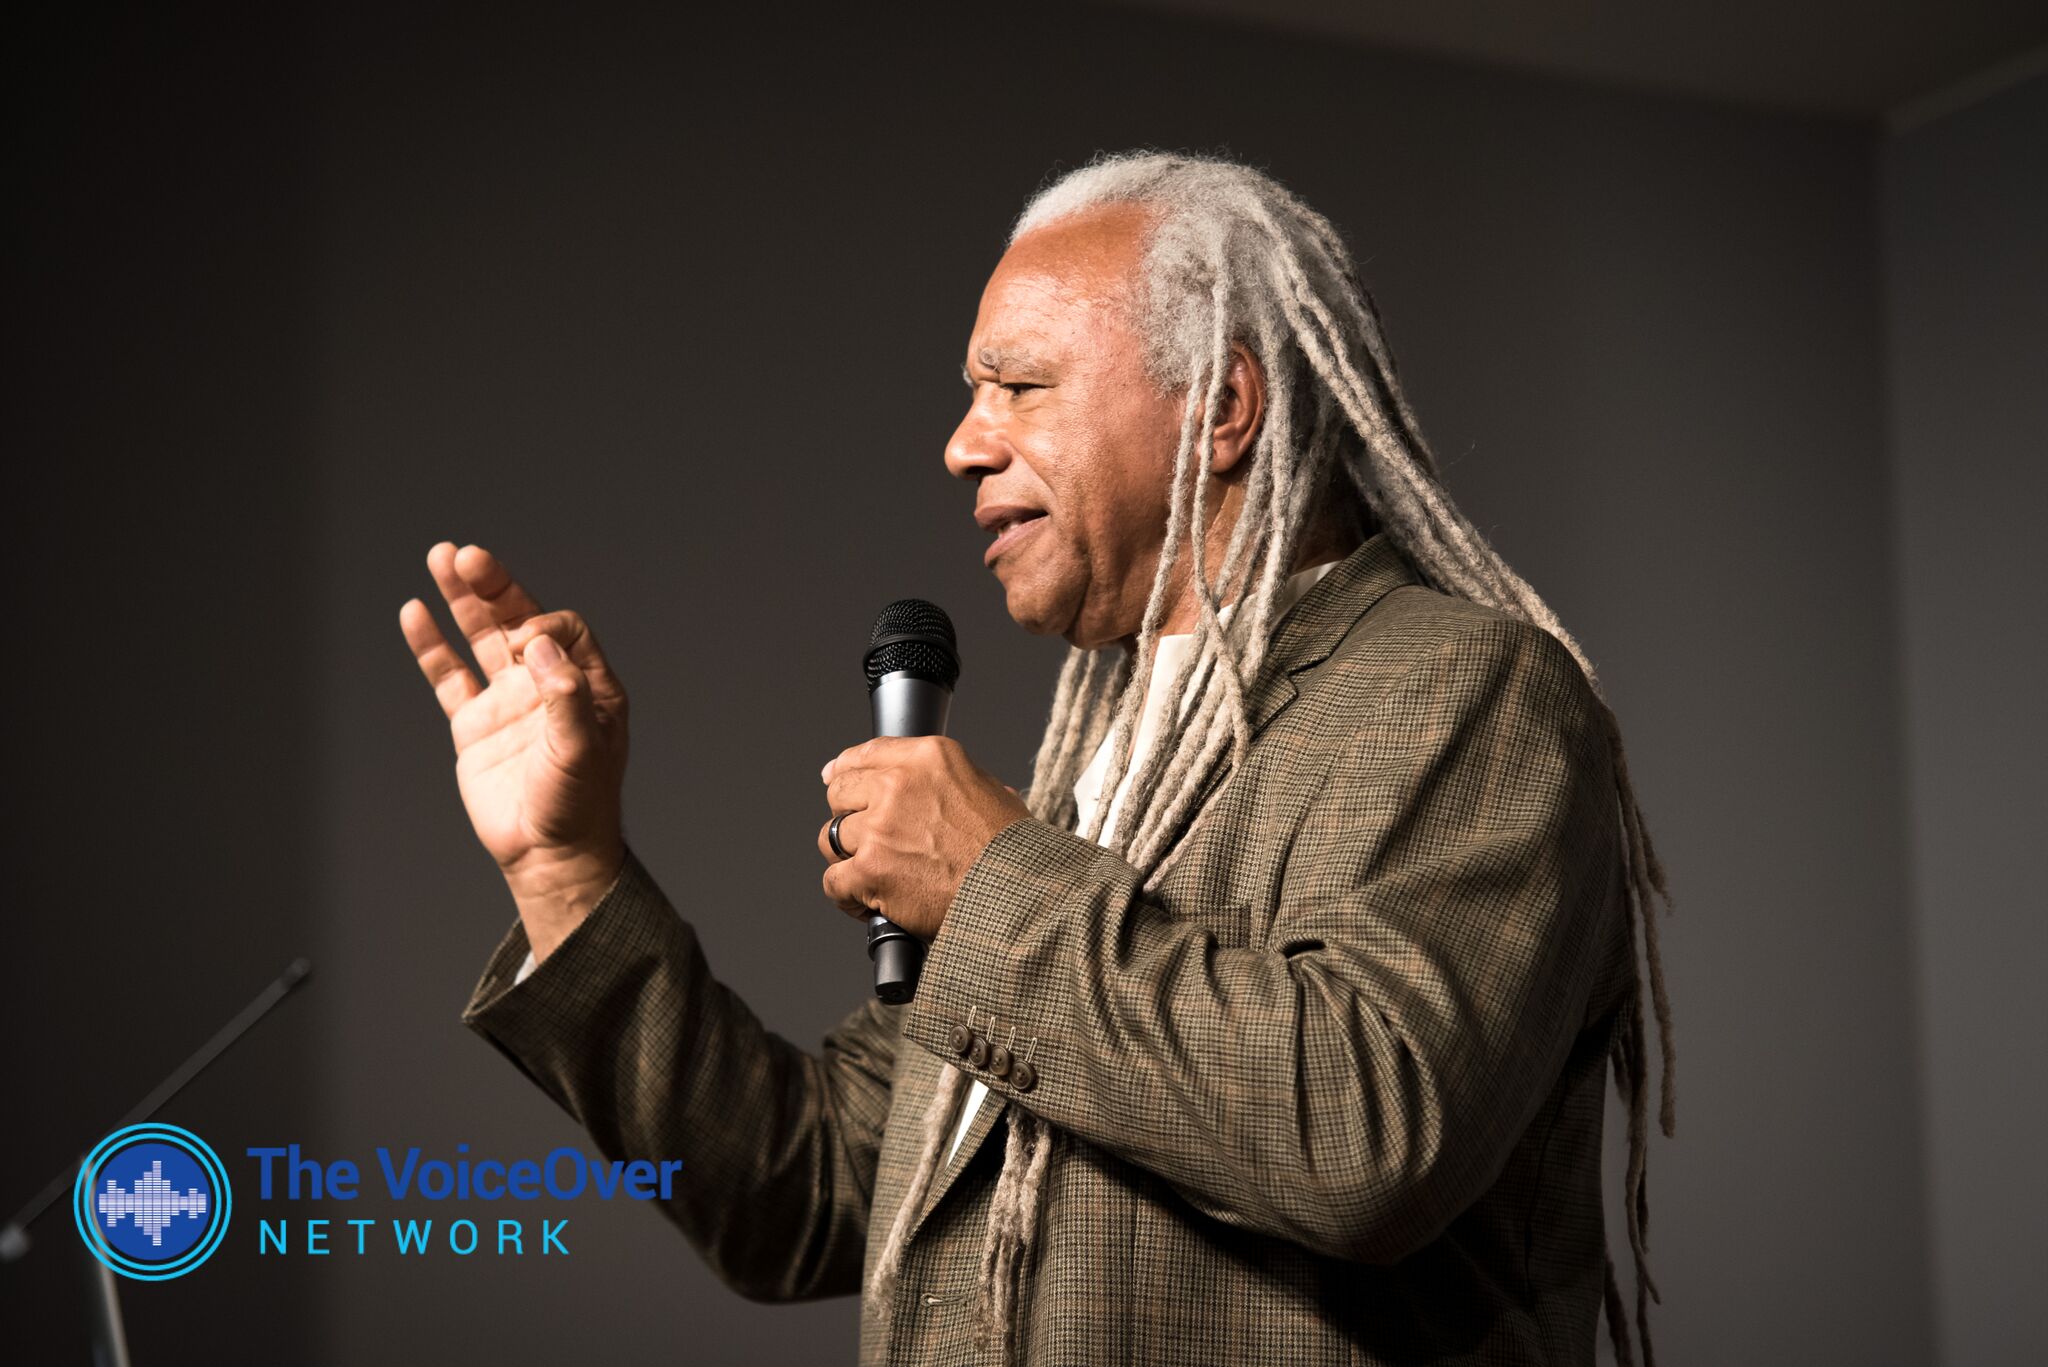 THE VOICEOVER NETWORK WITH DAVE FENNOY